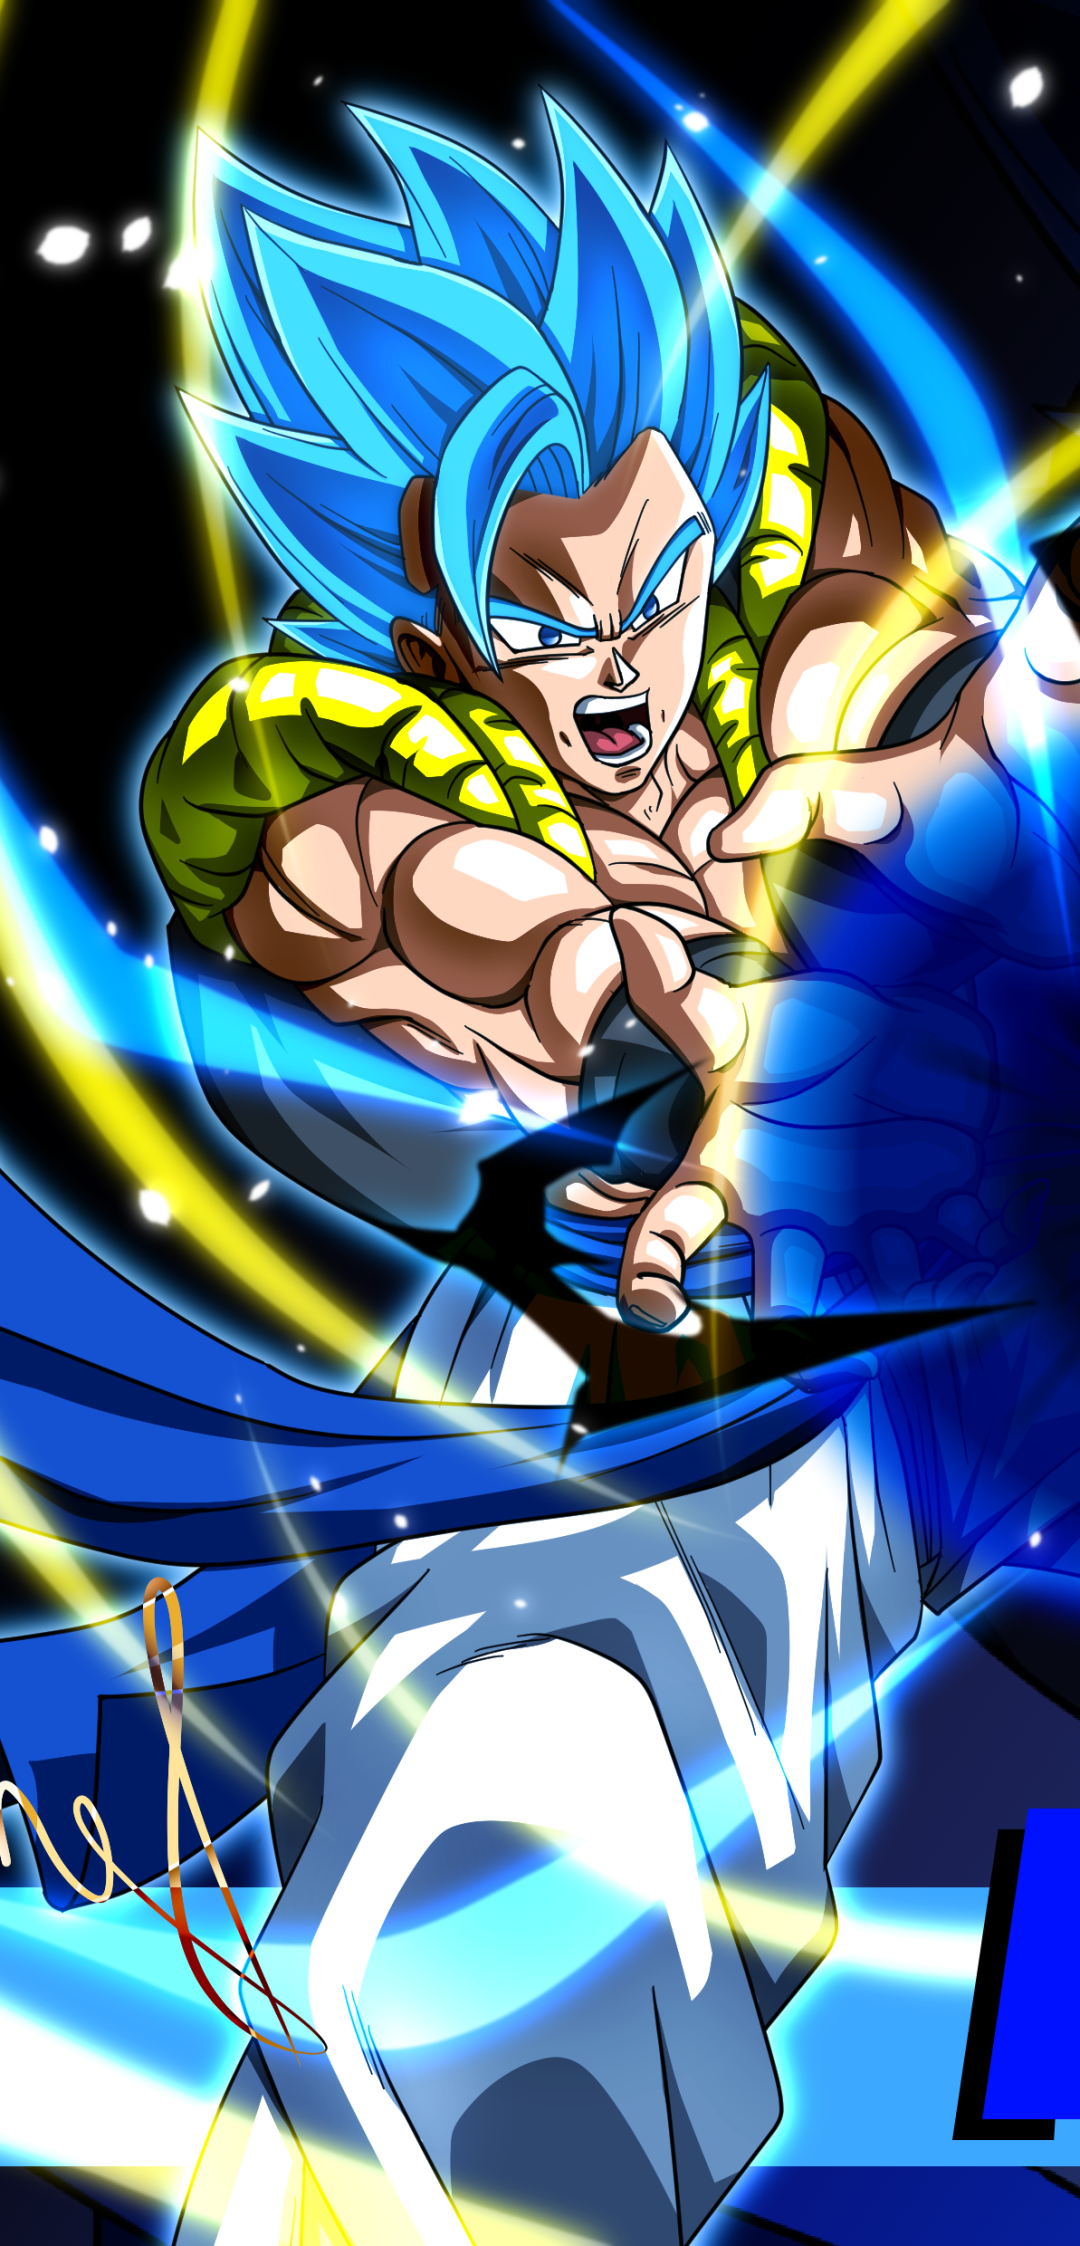 Live Wallpapers tagged with Gogeta